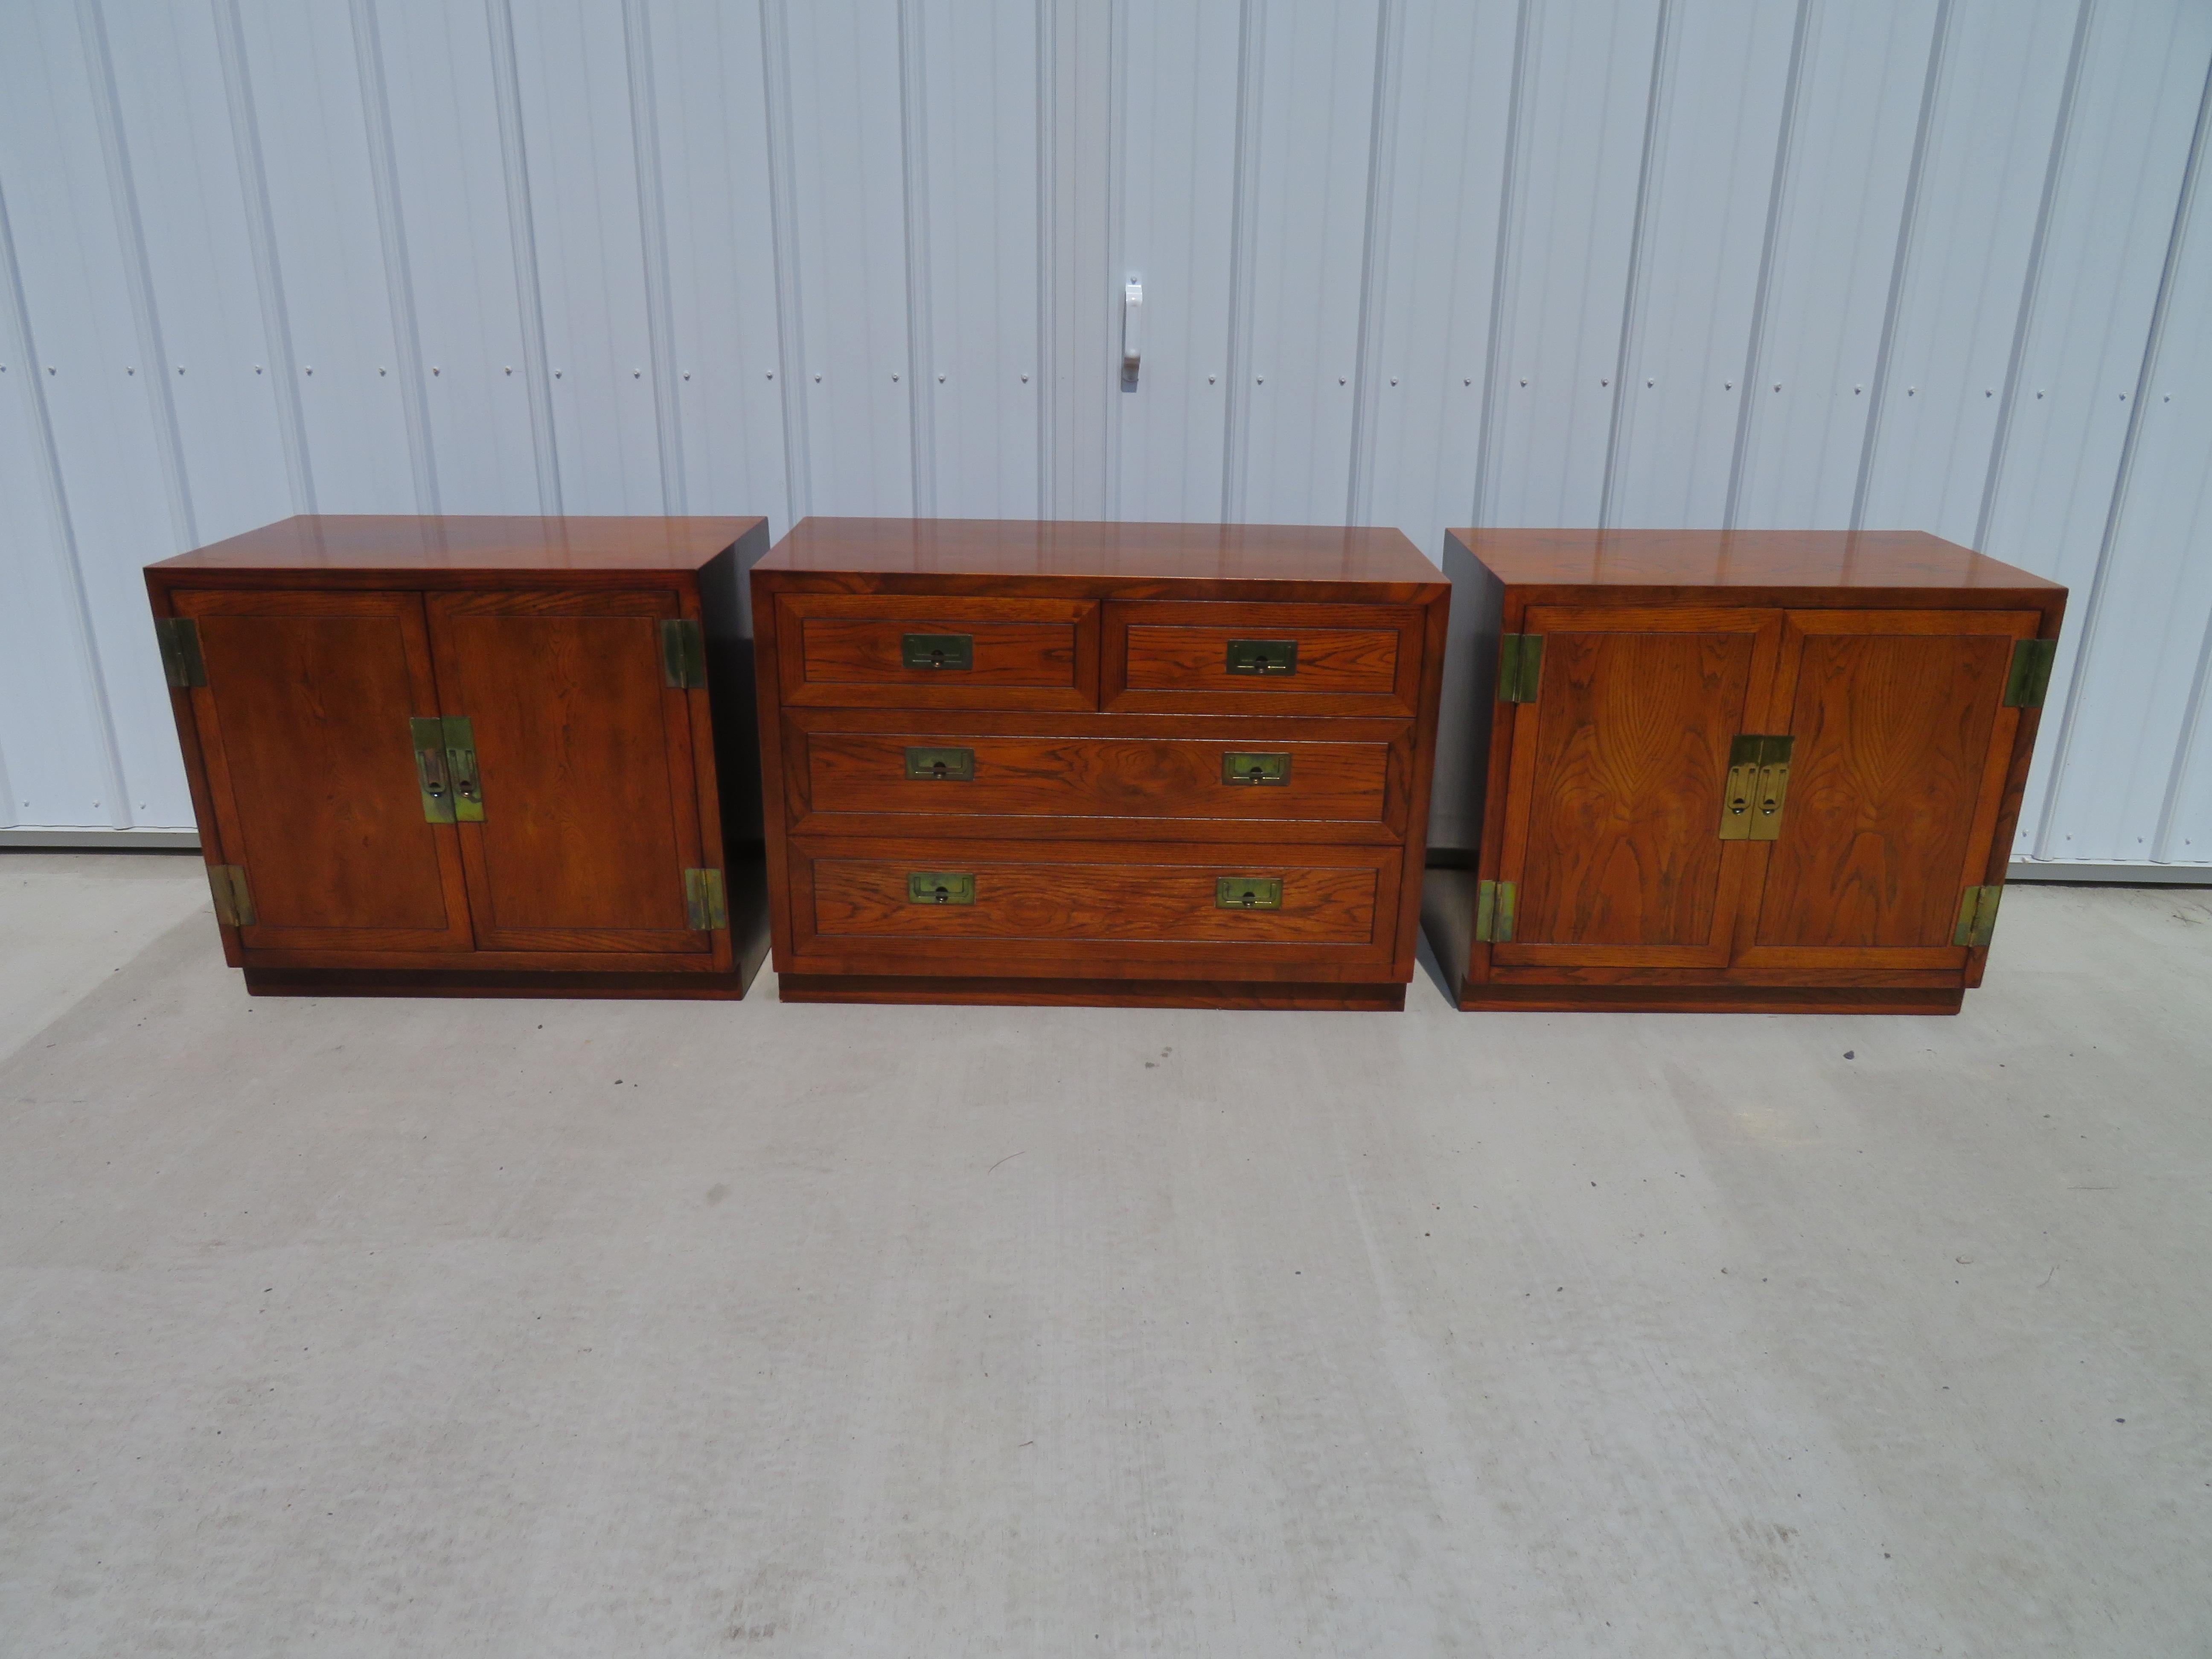 3 outstanding Henredon Campaign chests forming a long low credenza. I love all three used together as shown but can also be used as bedside bachelor chests or even as end tables. The two-door chests measure 28